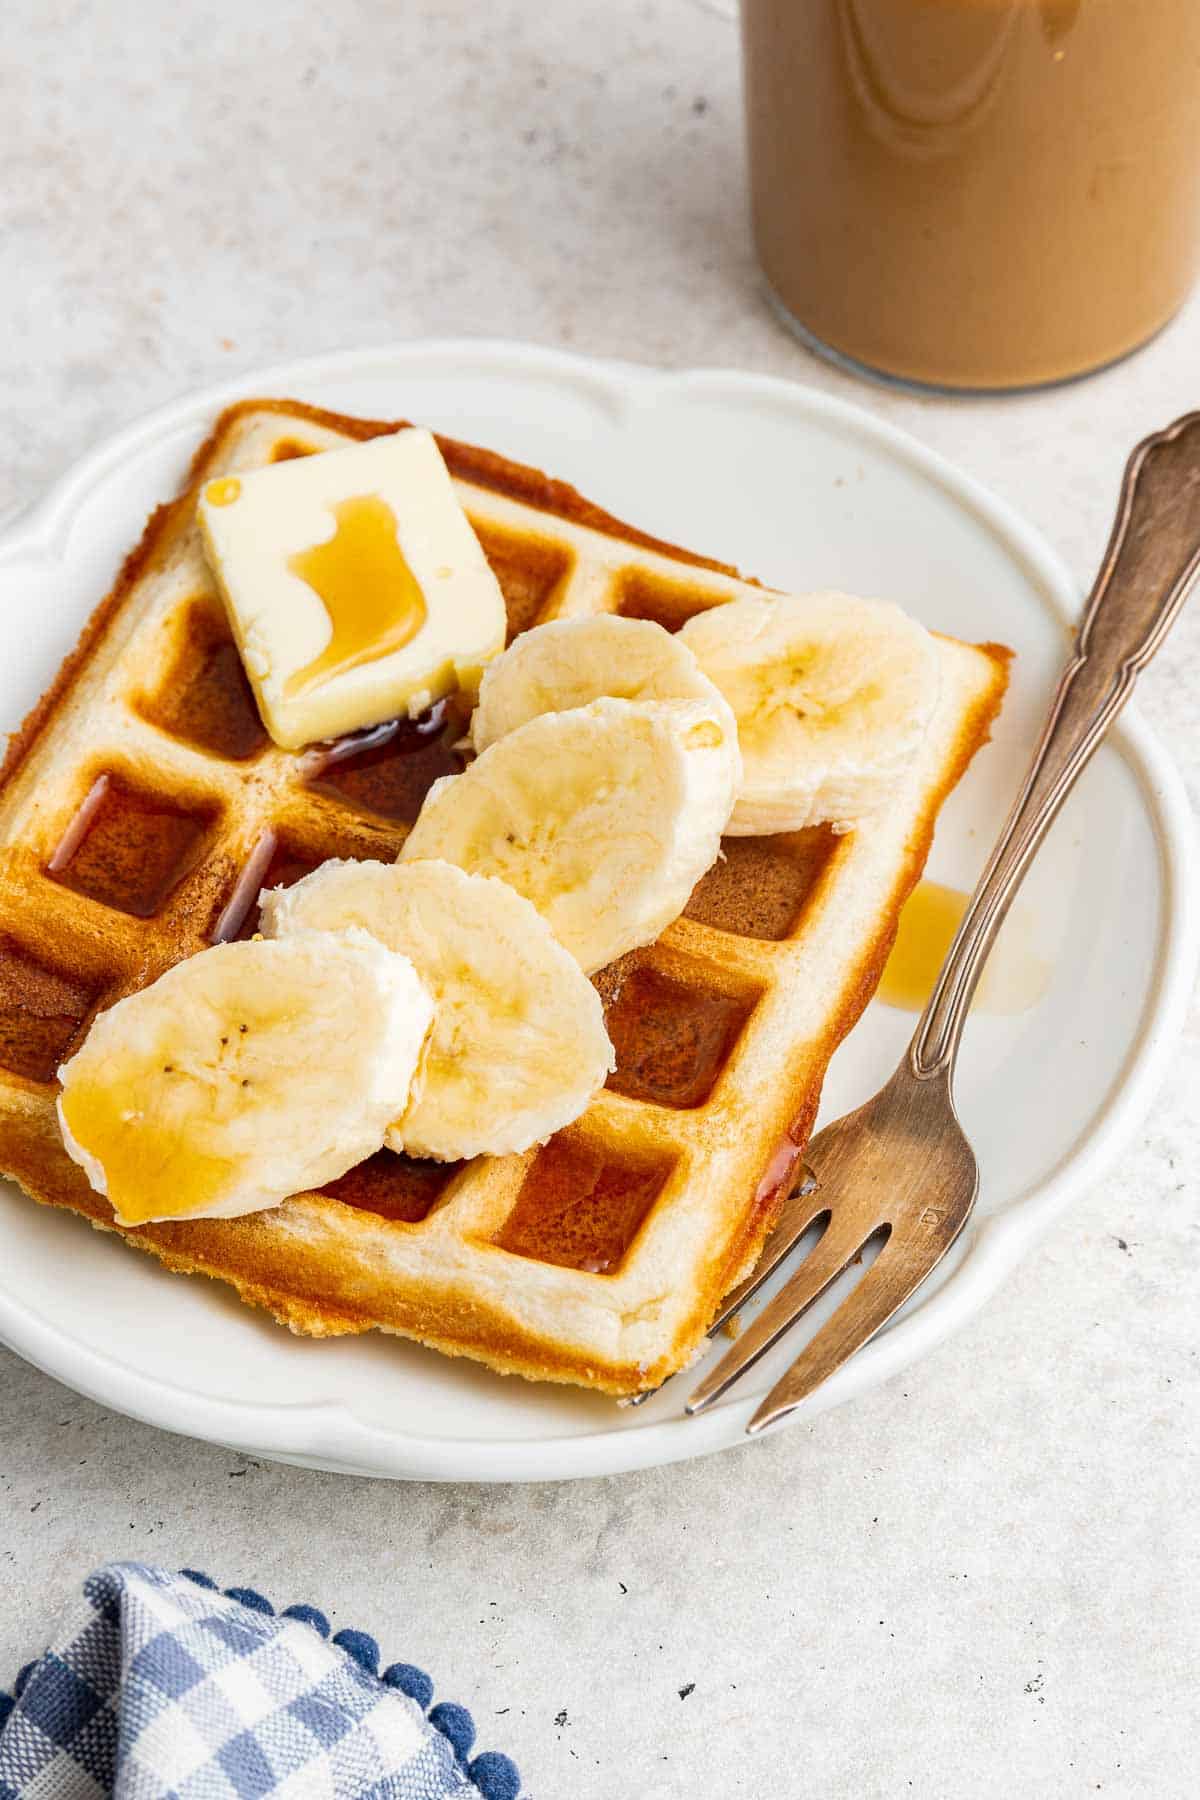 A single waffle for one person on white plate with coffee and fork on side.